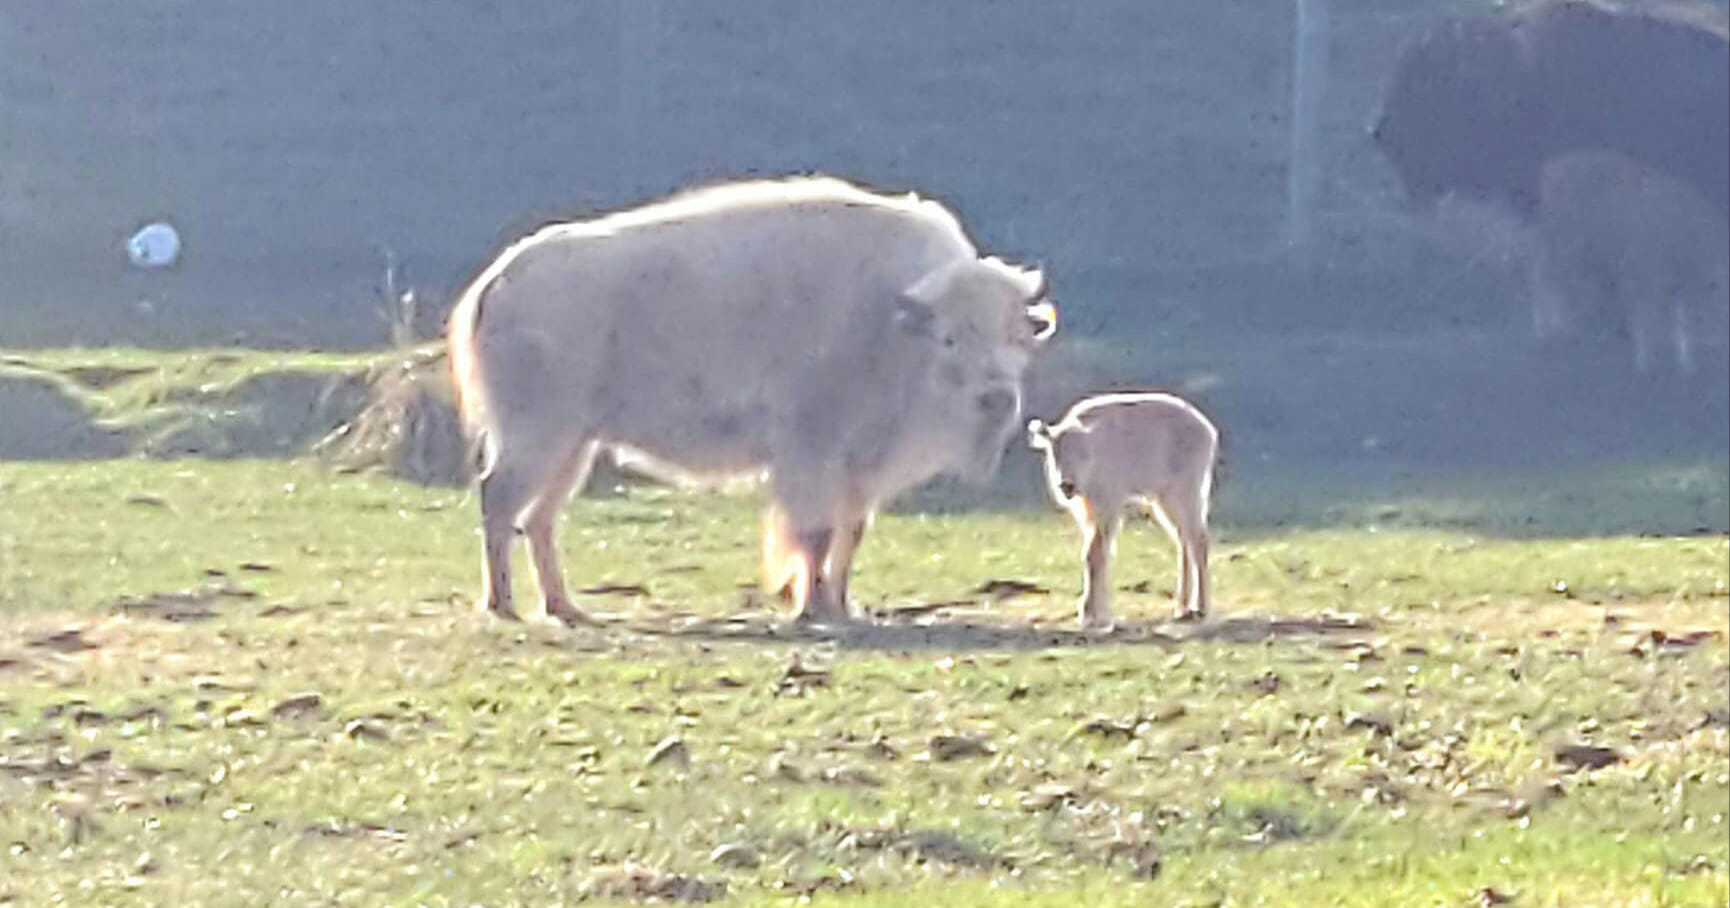 Extremely rare, one-in-10-million white bison born in Wyoming state park